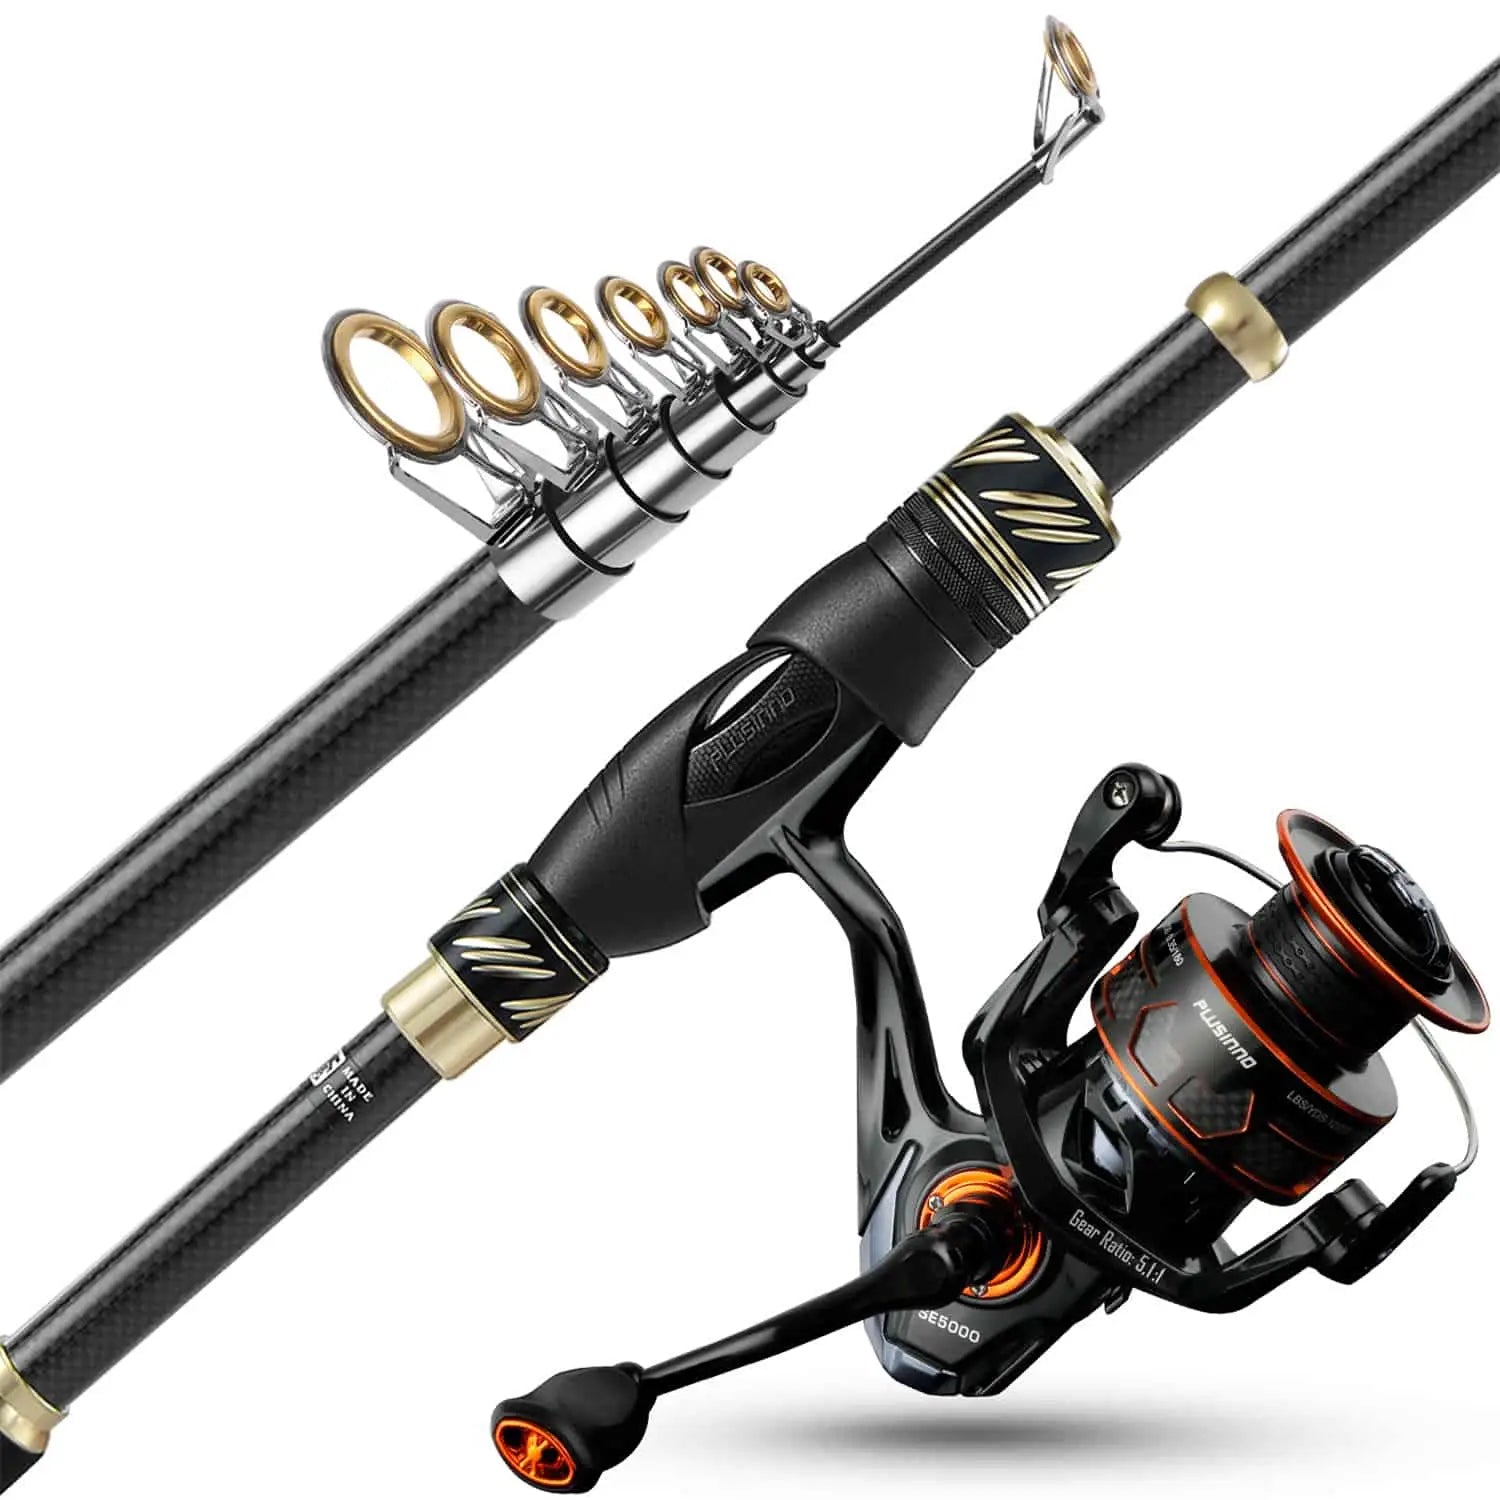  PLUSINNO Fishing Rod and Reel Combos, Fishing Net，Saltwater  Freshwater Resistant Fishing Gear : Sports & Outdoors